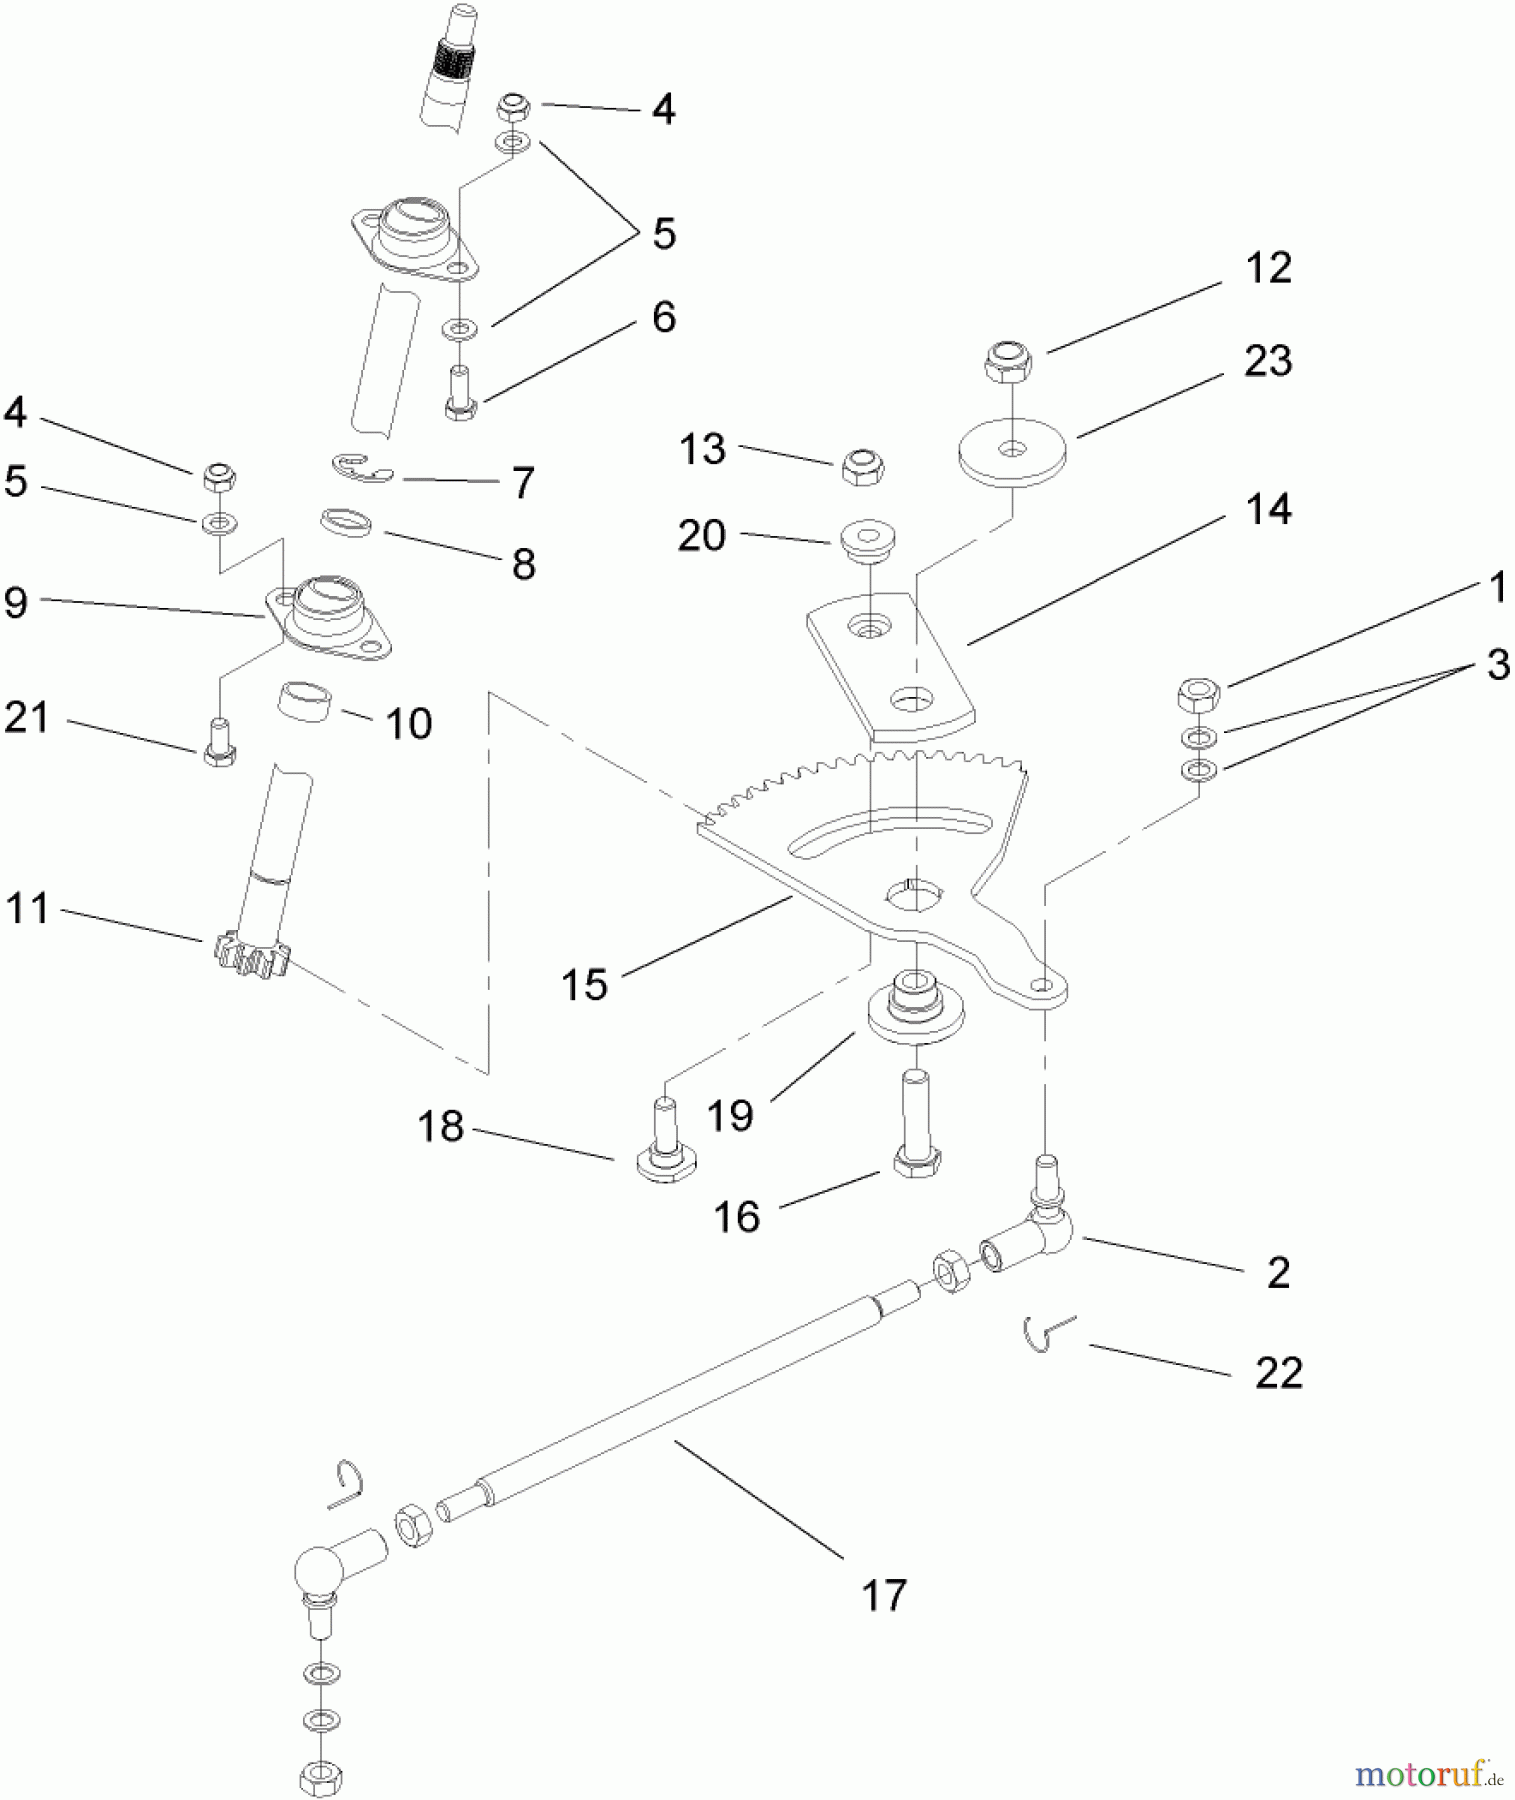  Toro Neu Mowers, Lawn & Garden Tractor Seite 1 74592 (DH 220) - Toro DH 220 Lawn Tractor, 2008 (280000001-280000528) STEERING ASSEMBLY